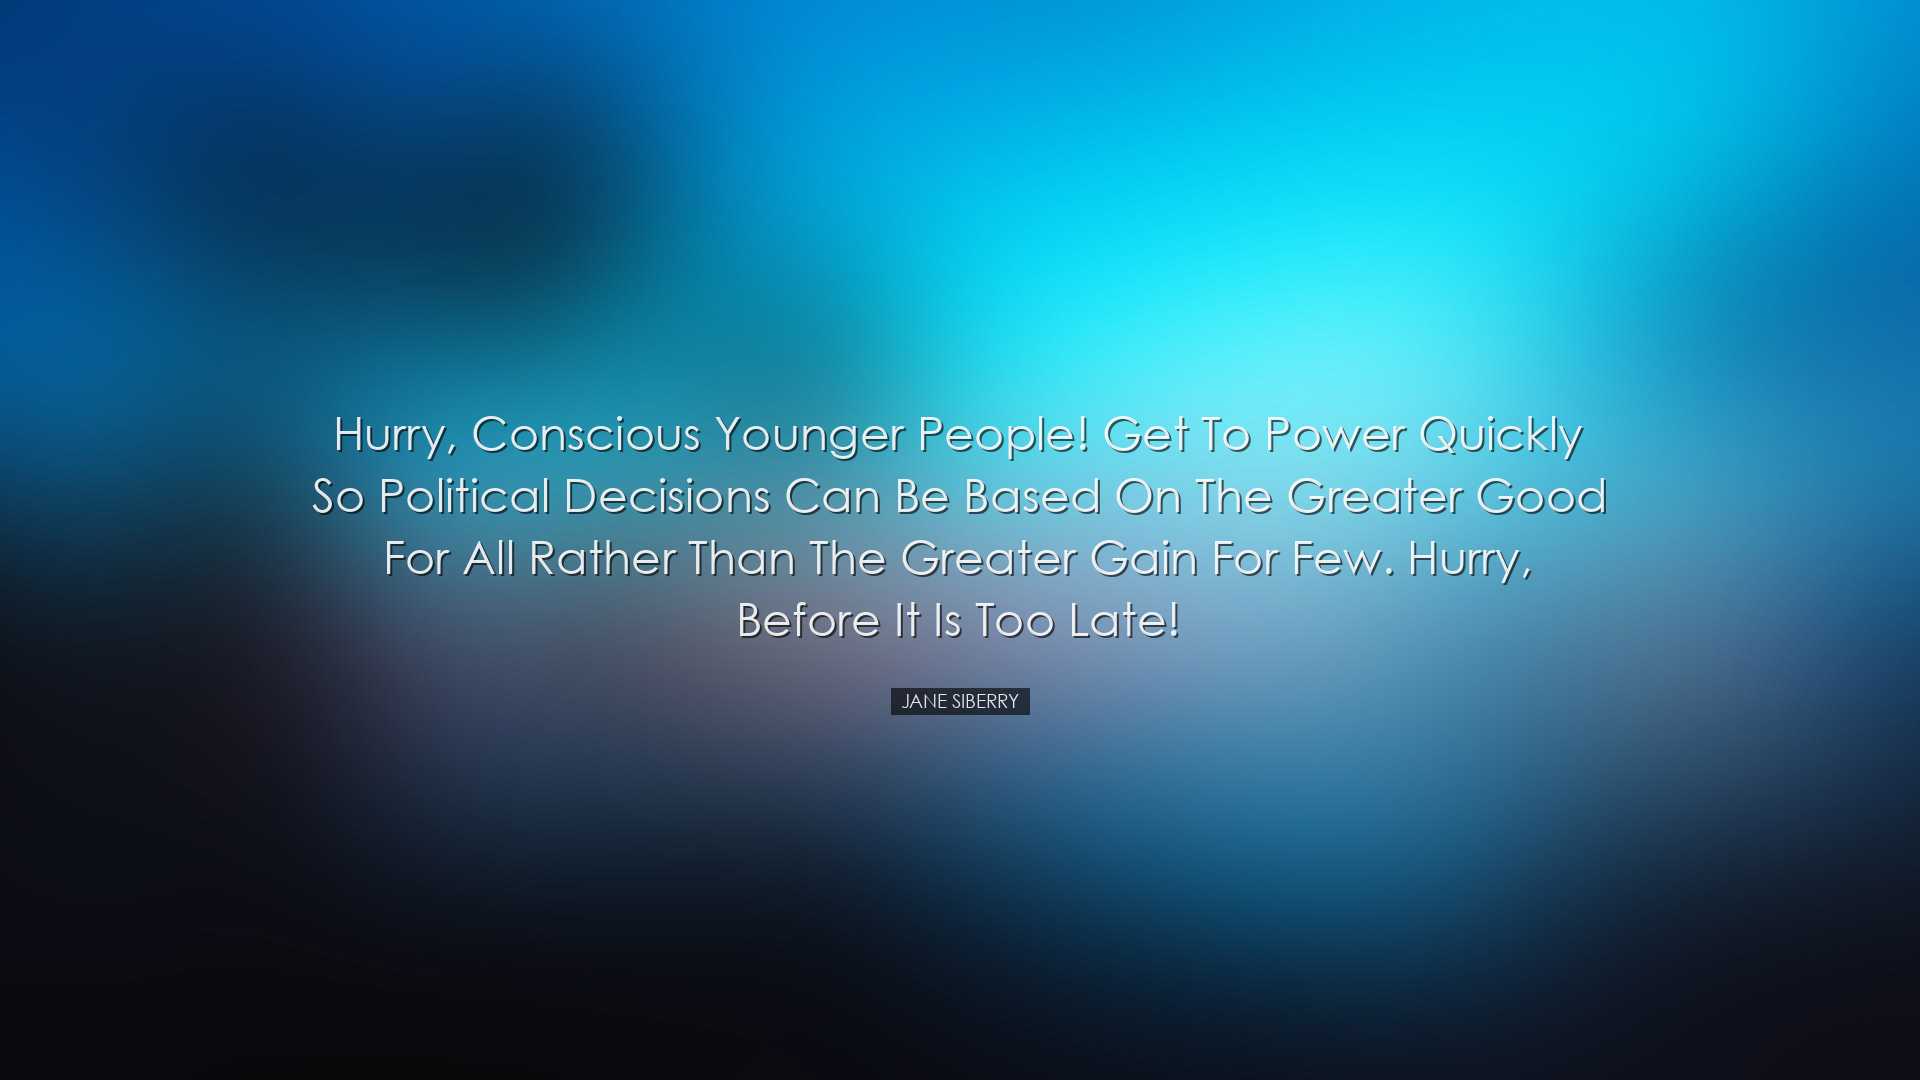 Hurry, conscious younger people! Get to power quickly so political